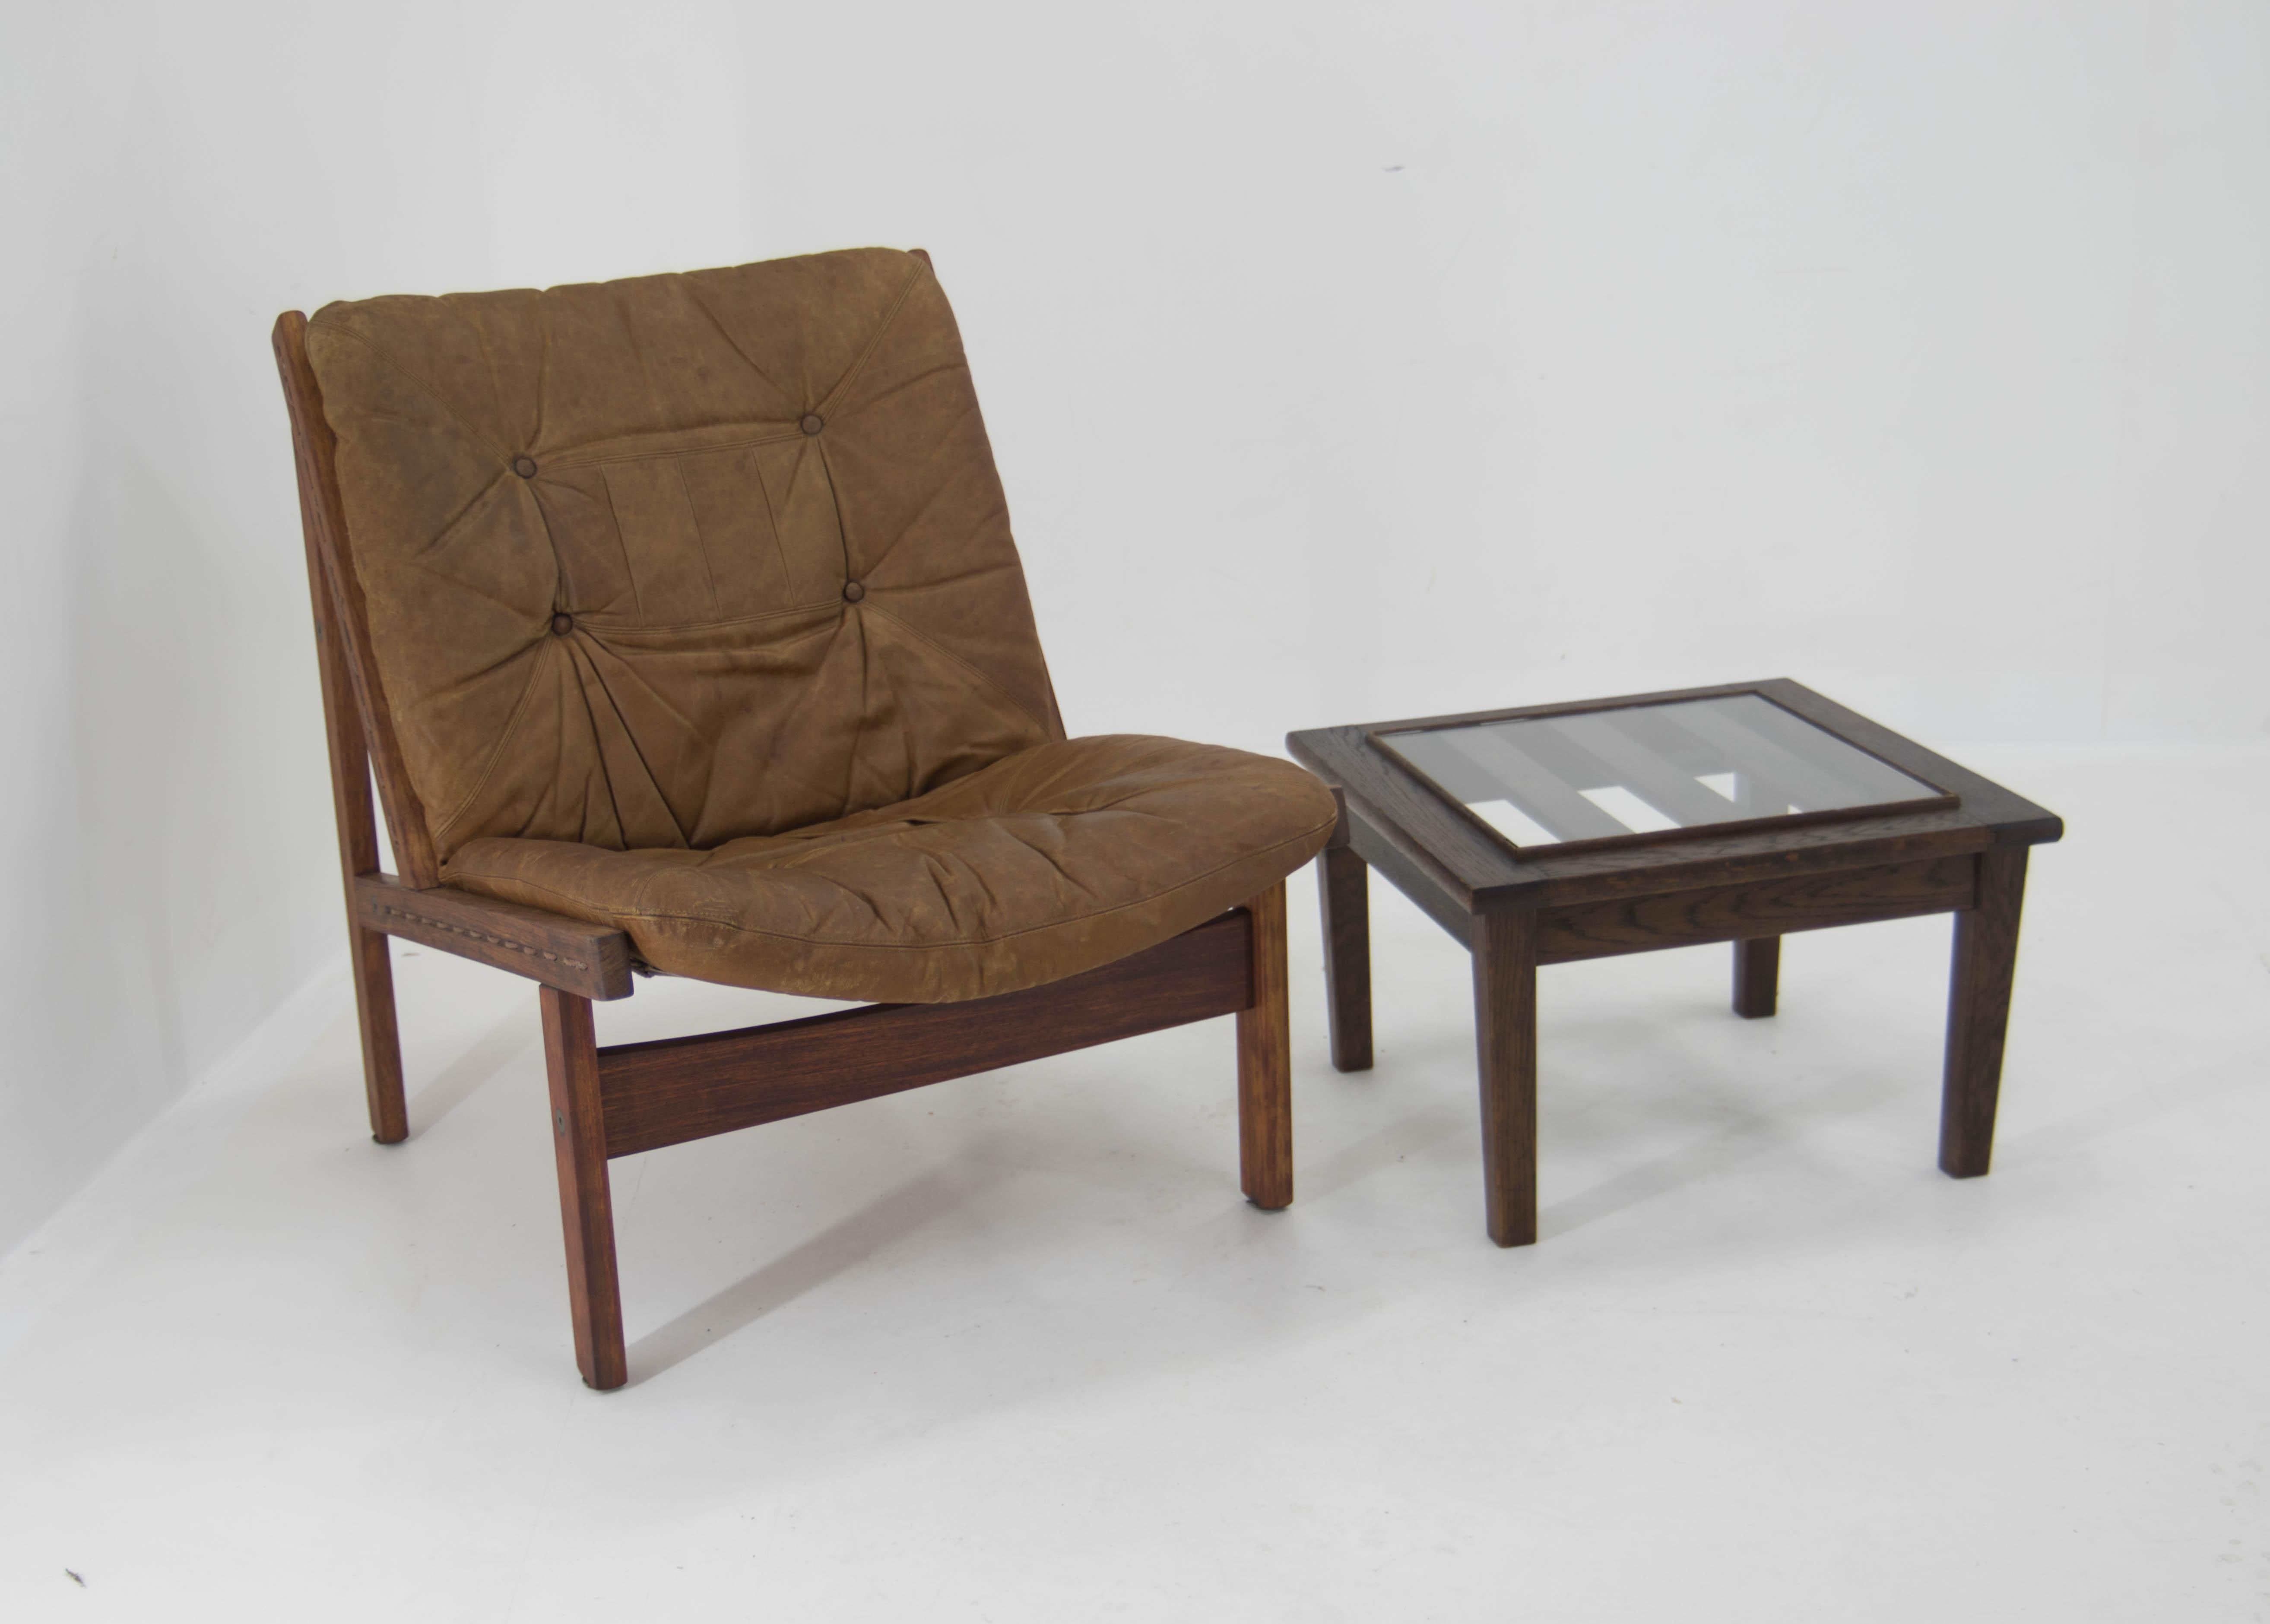 Rare Functionalist Side Table by Antonin Heythum, 1930s For Sale 5